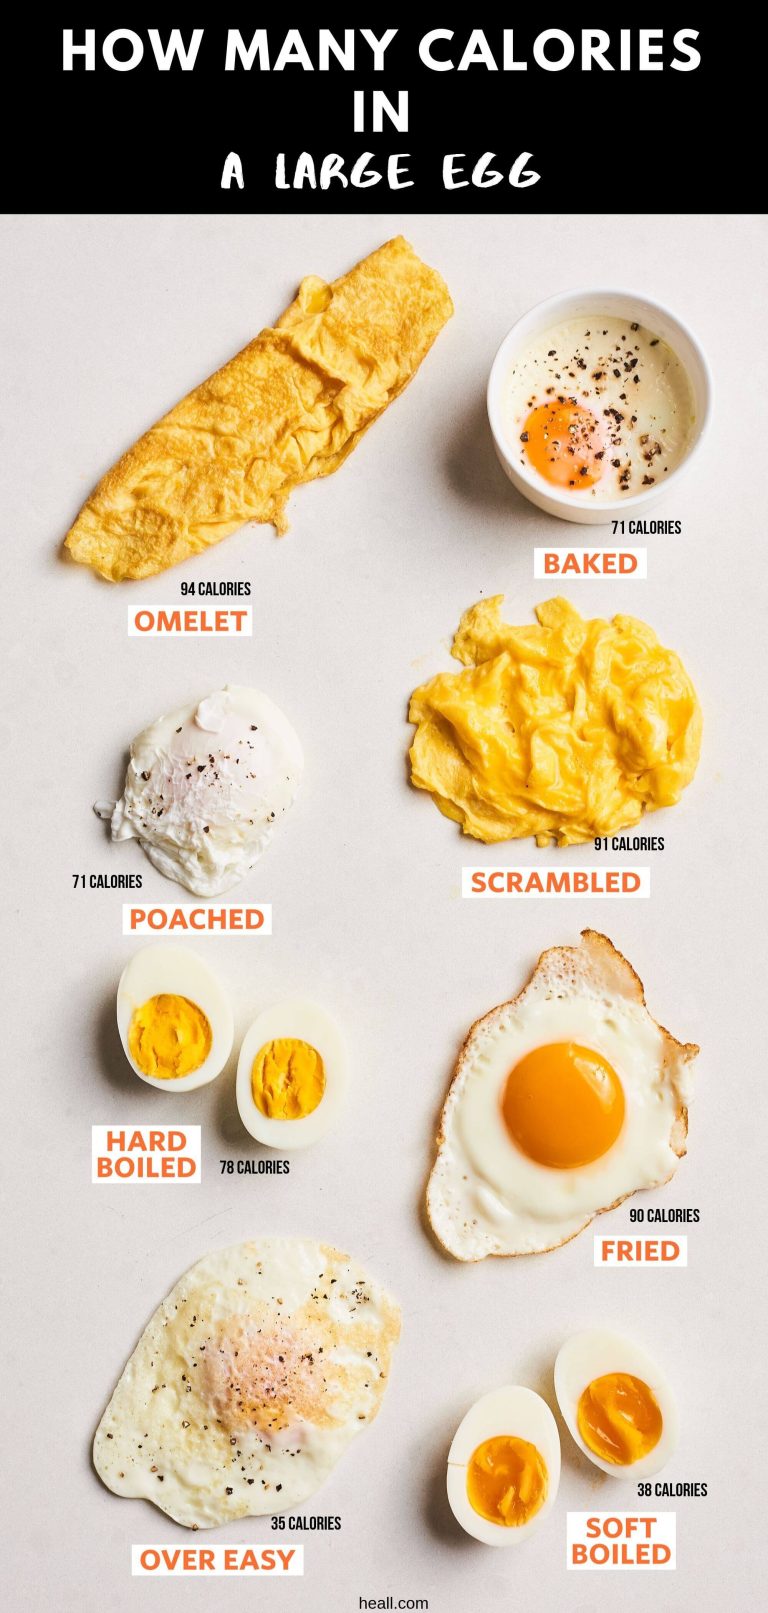 how-many-calories-in-an-egg-and-are-eggs-good-for-weight-loss